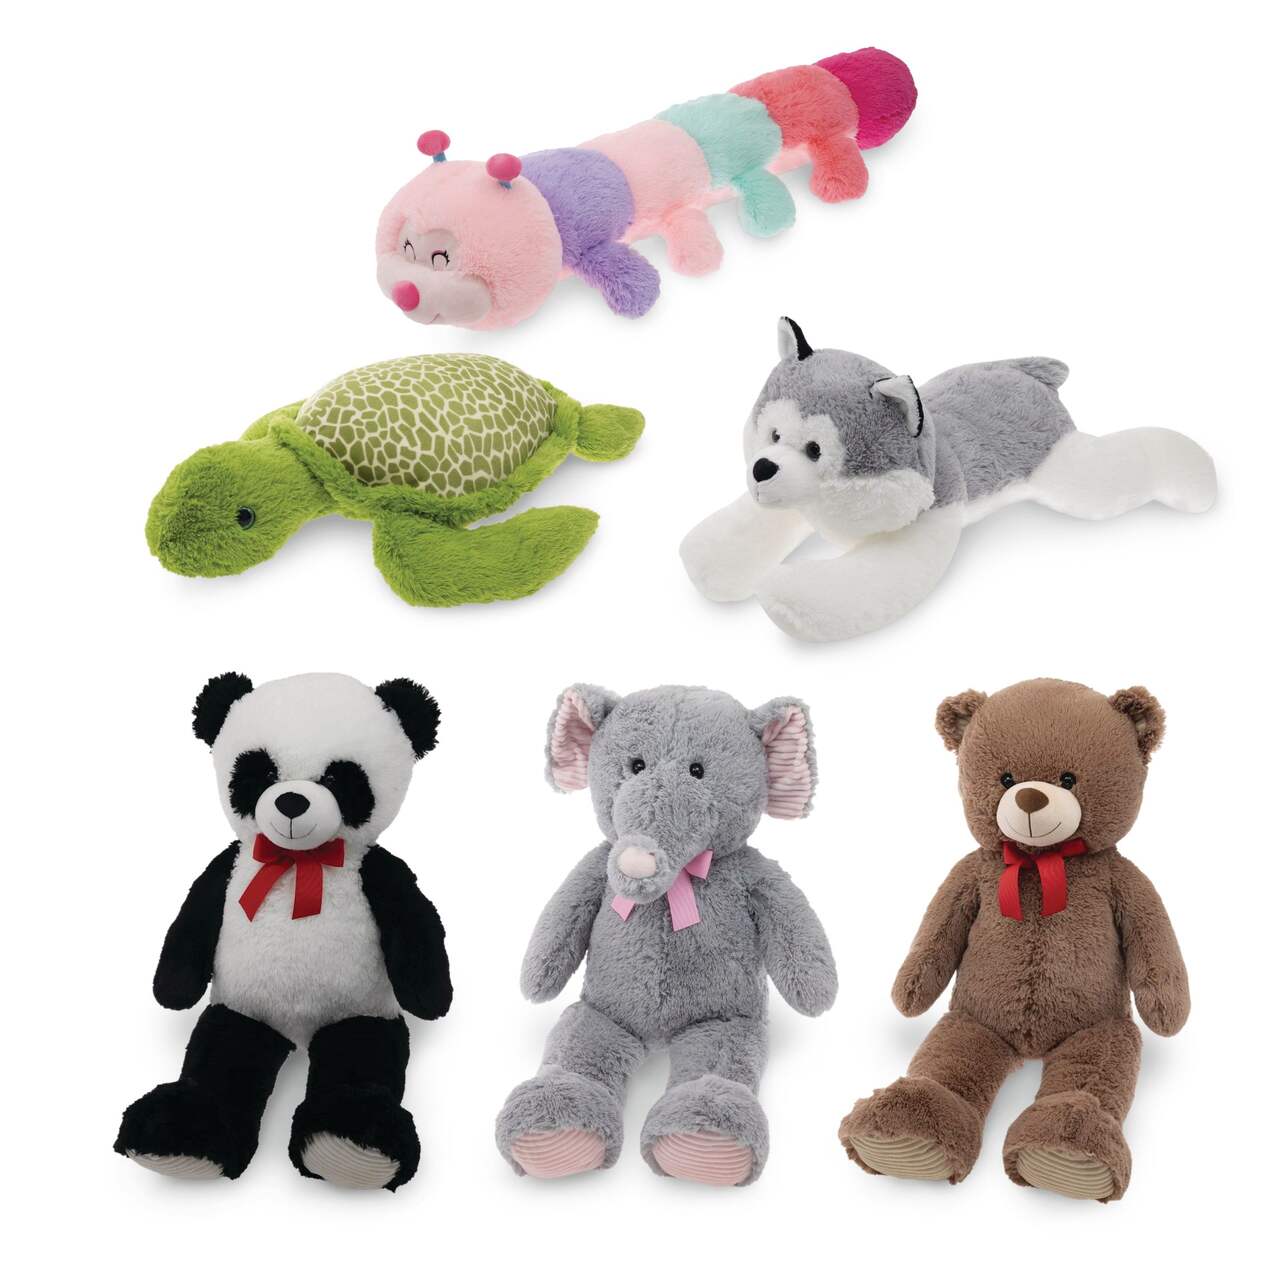 Cute Plush Stuffed Animal Toys, Assorted, Ages 3+